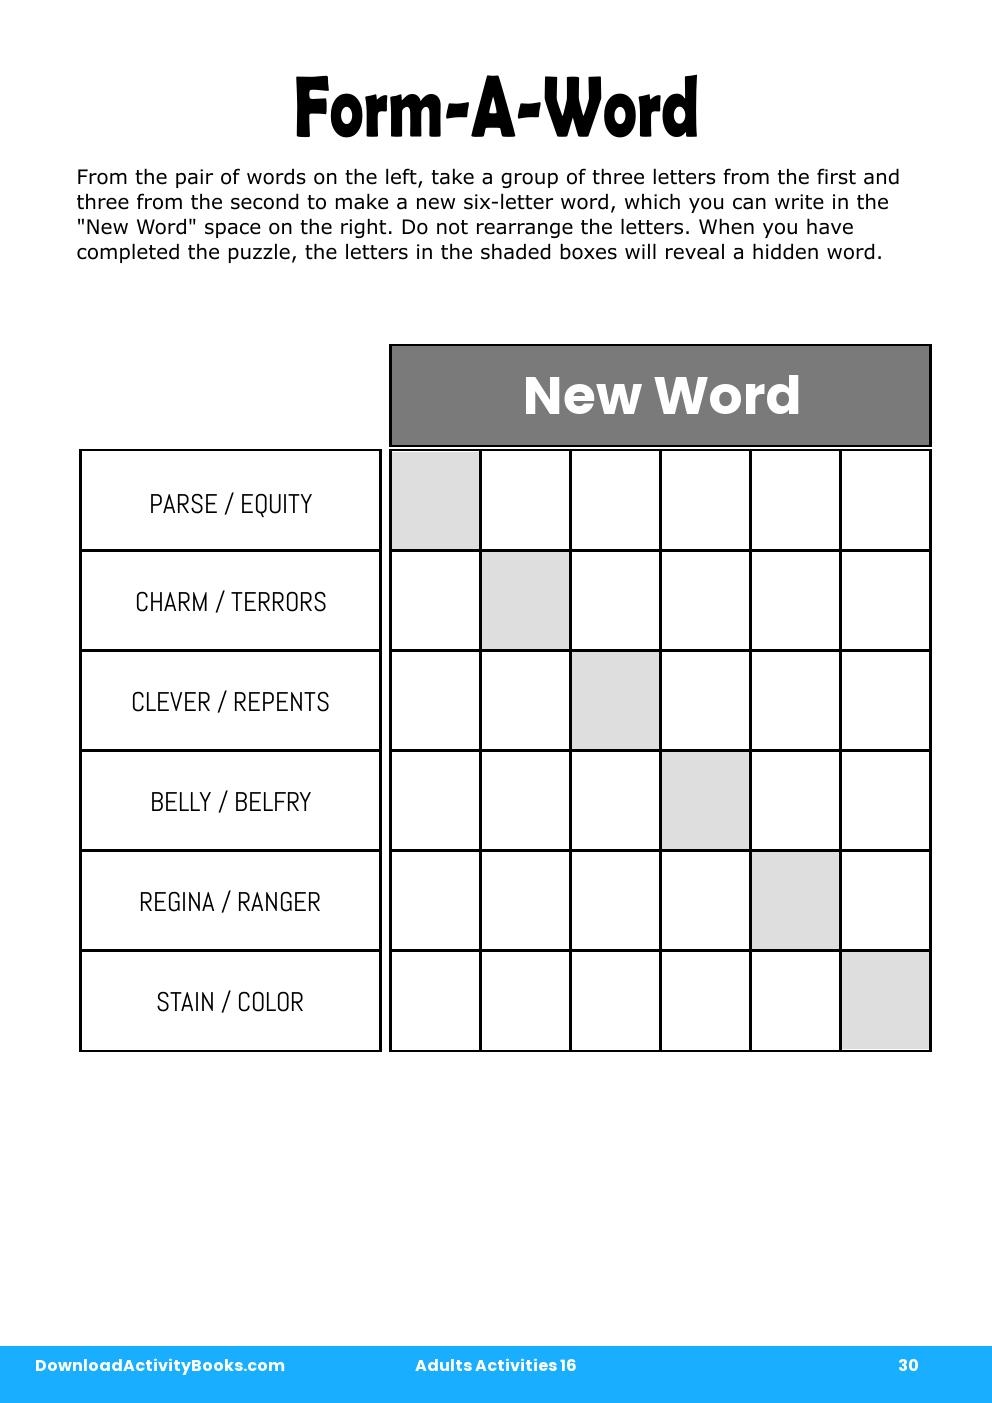 Form-A-Word in Adults Activities 16